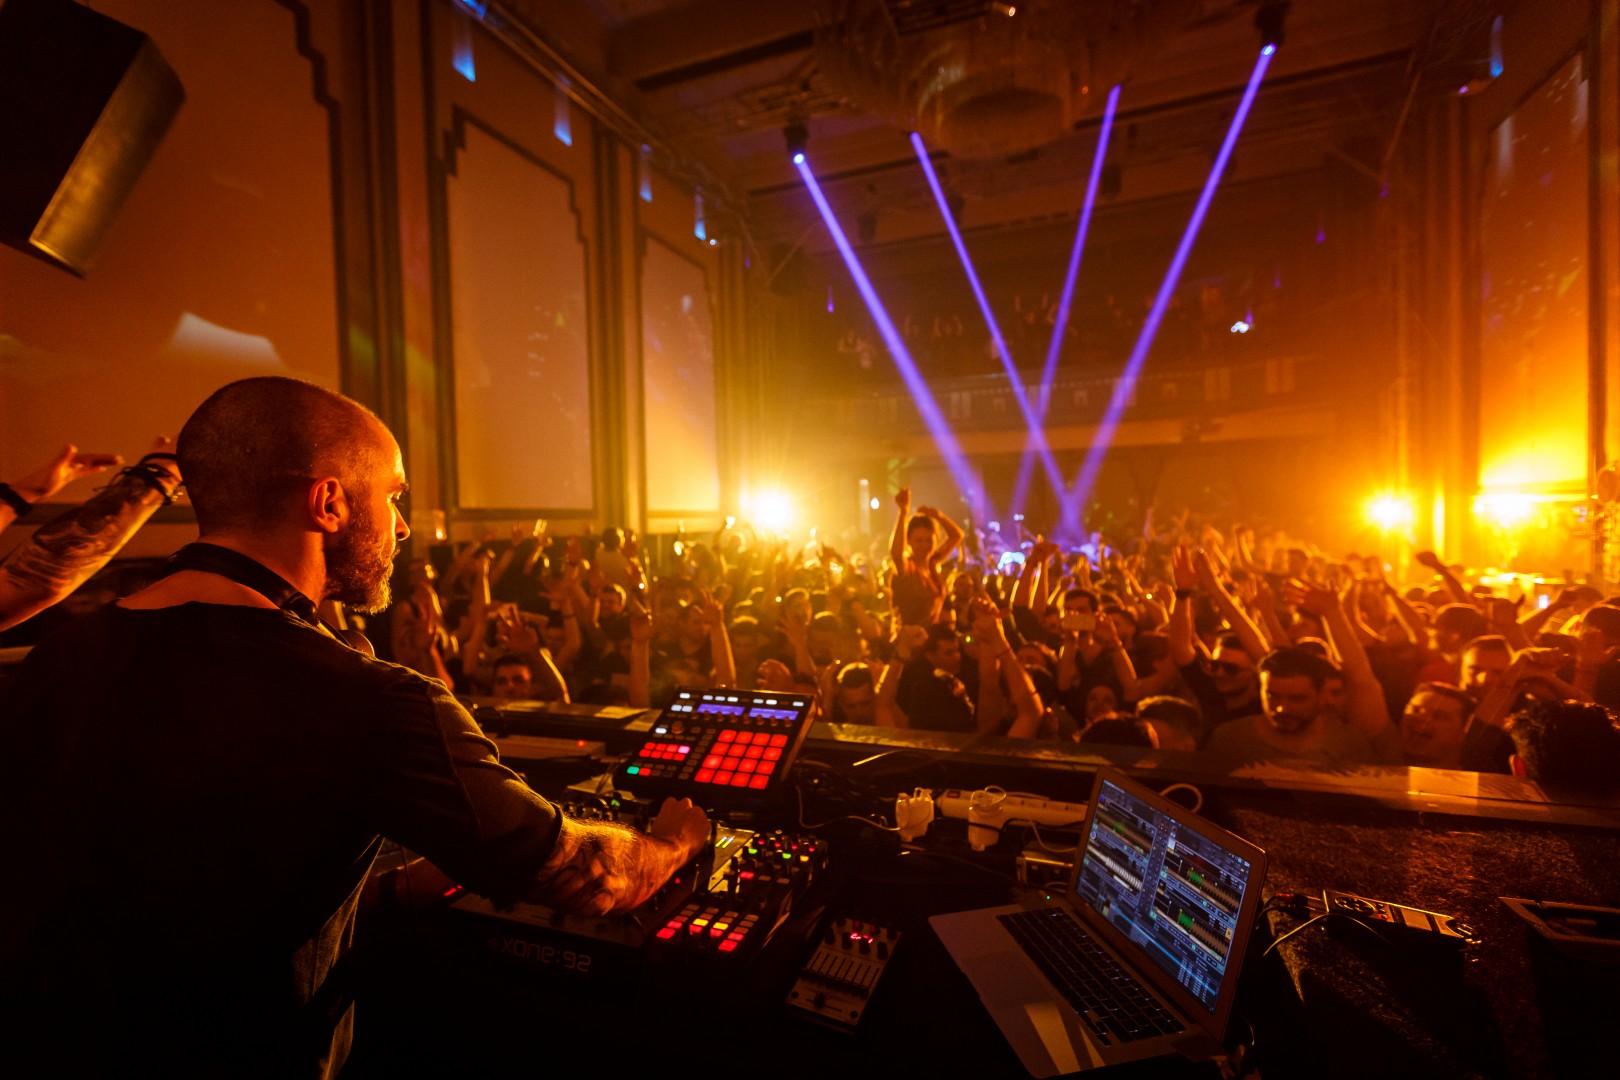 Chris Liebing at Kristal Club in Bucharest on February 20, 2016 (d1a9cfe872)